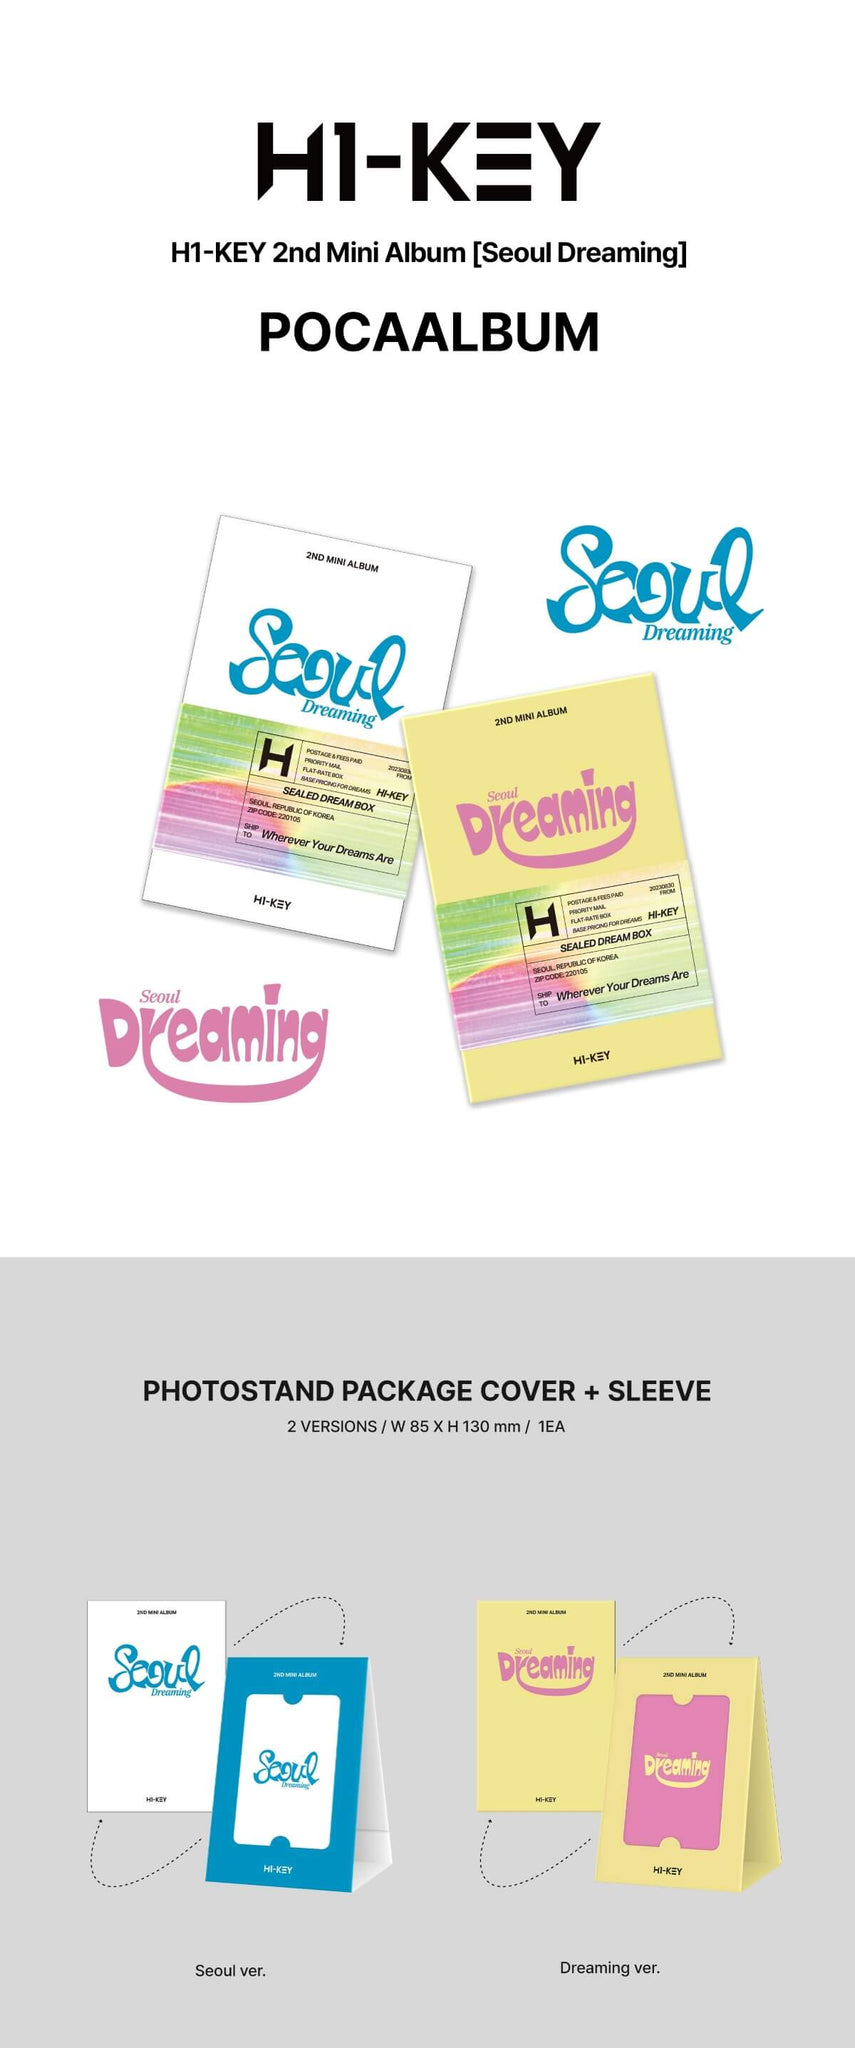 H1-KEY Seoul Dreaming POCA Version Inclusions Photo Stand Package Cover Sleeve